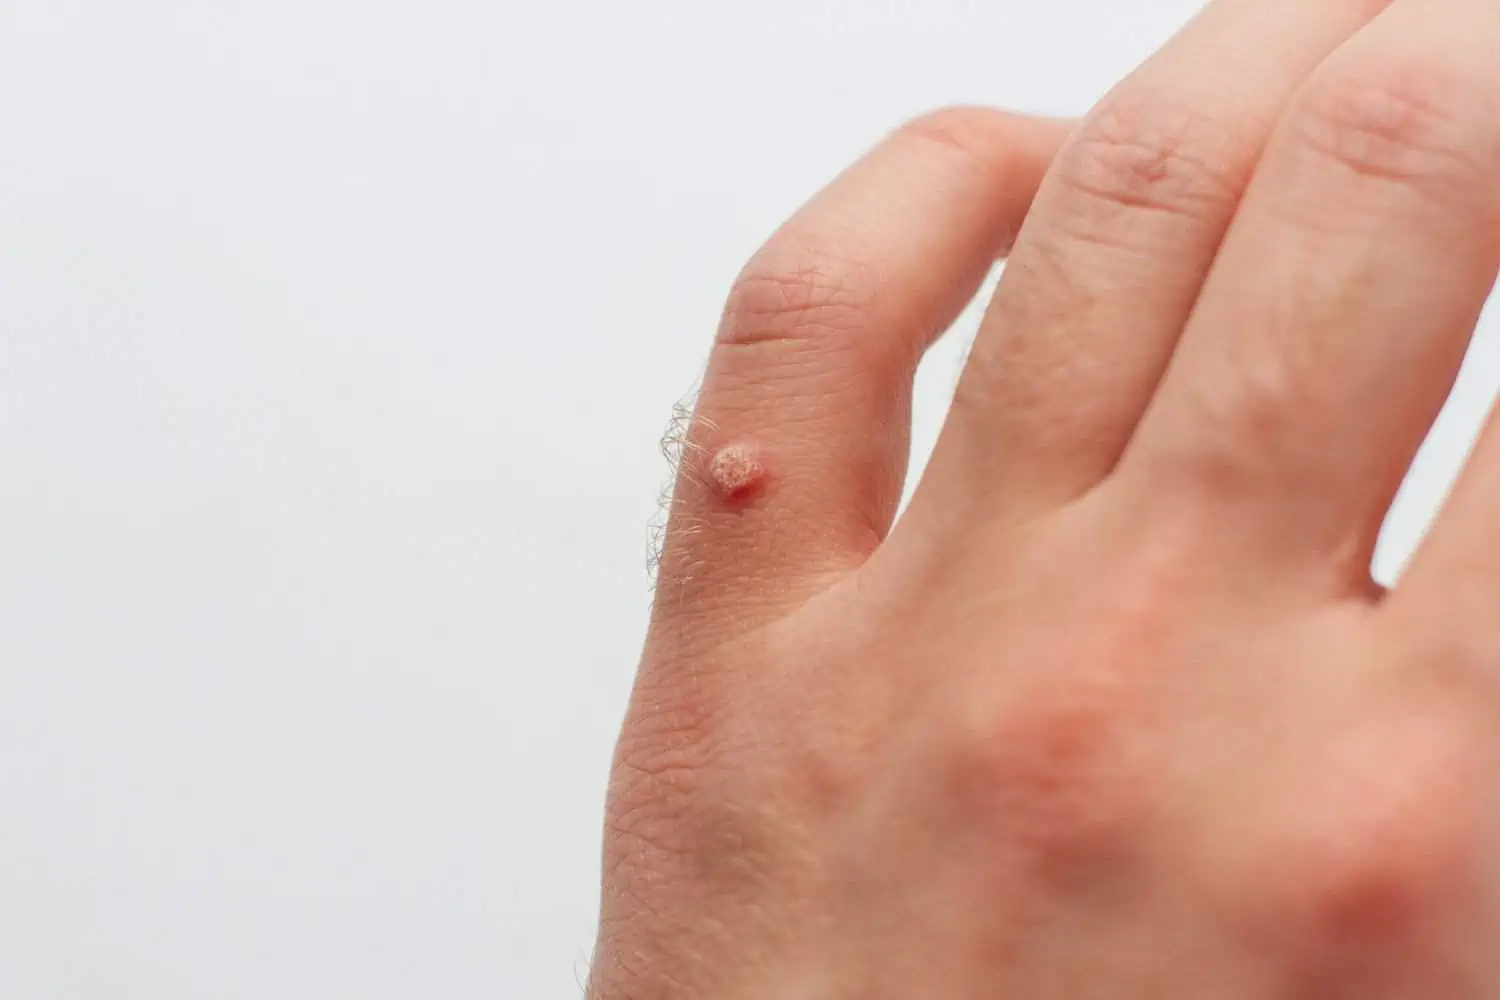 Everything you need to know about summertime warts, and how to get rid of them